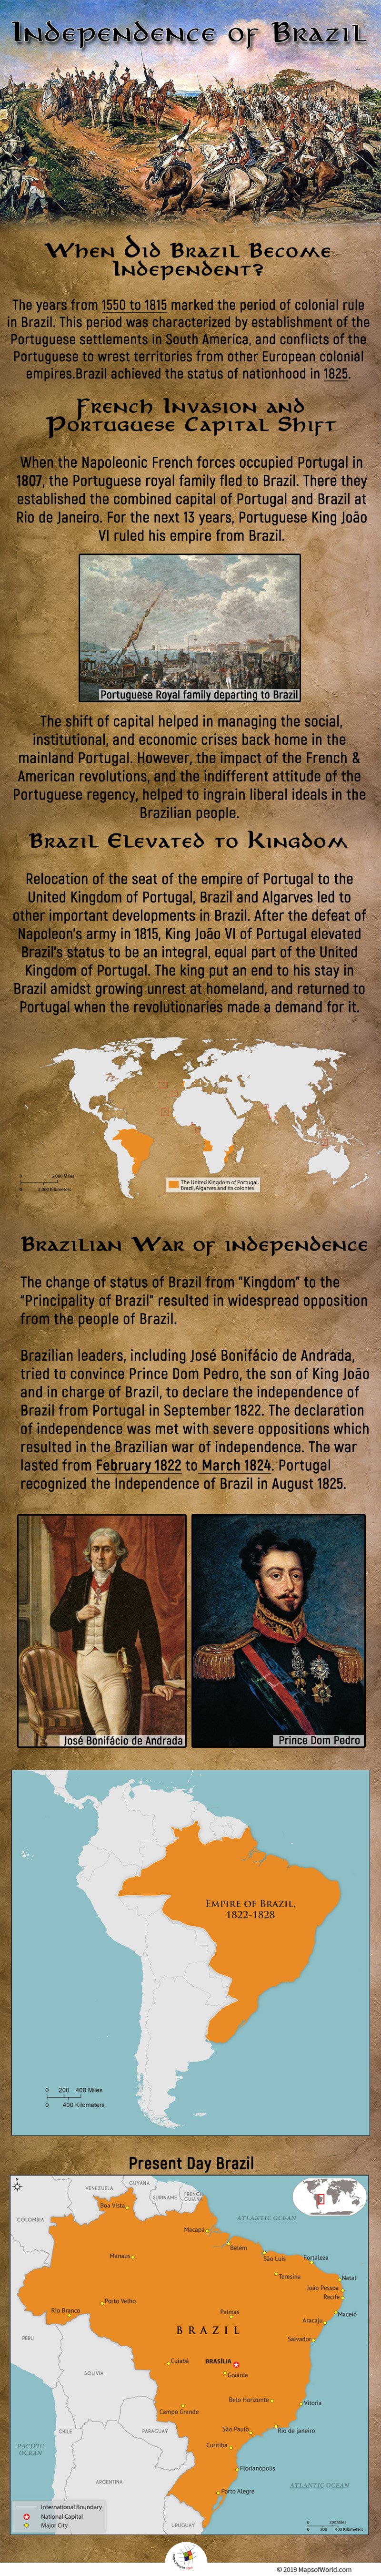 Infographic Giving Details on When Did Brazil Become Independent